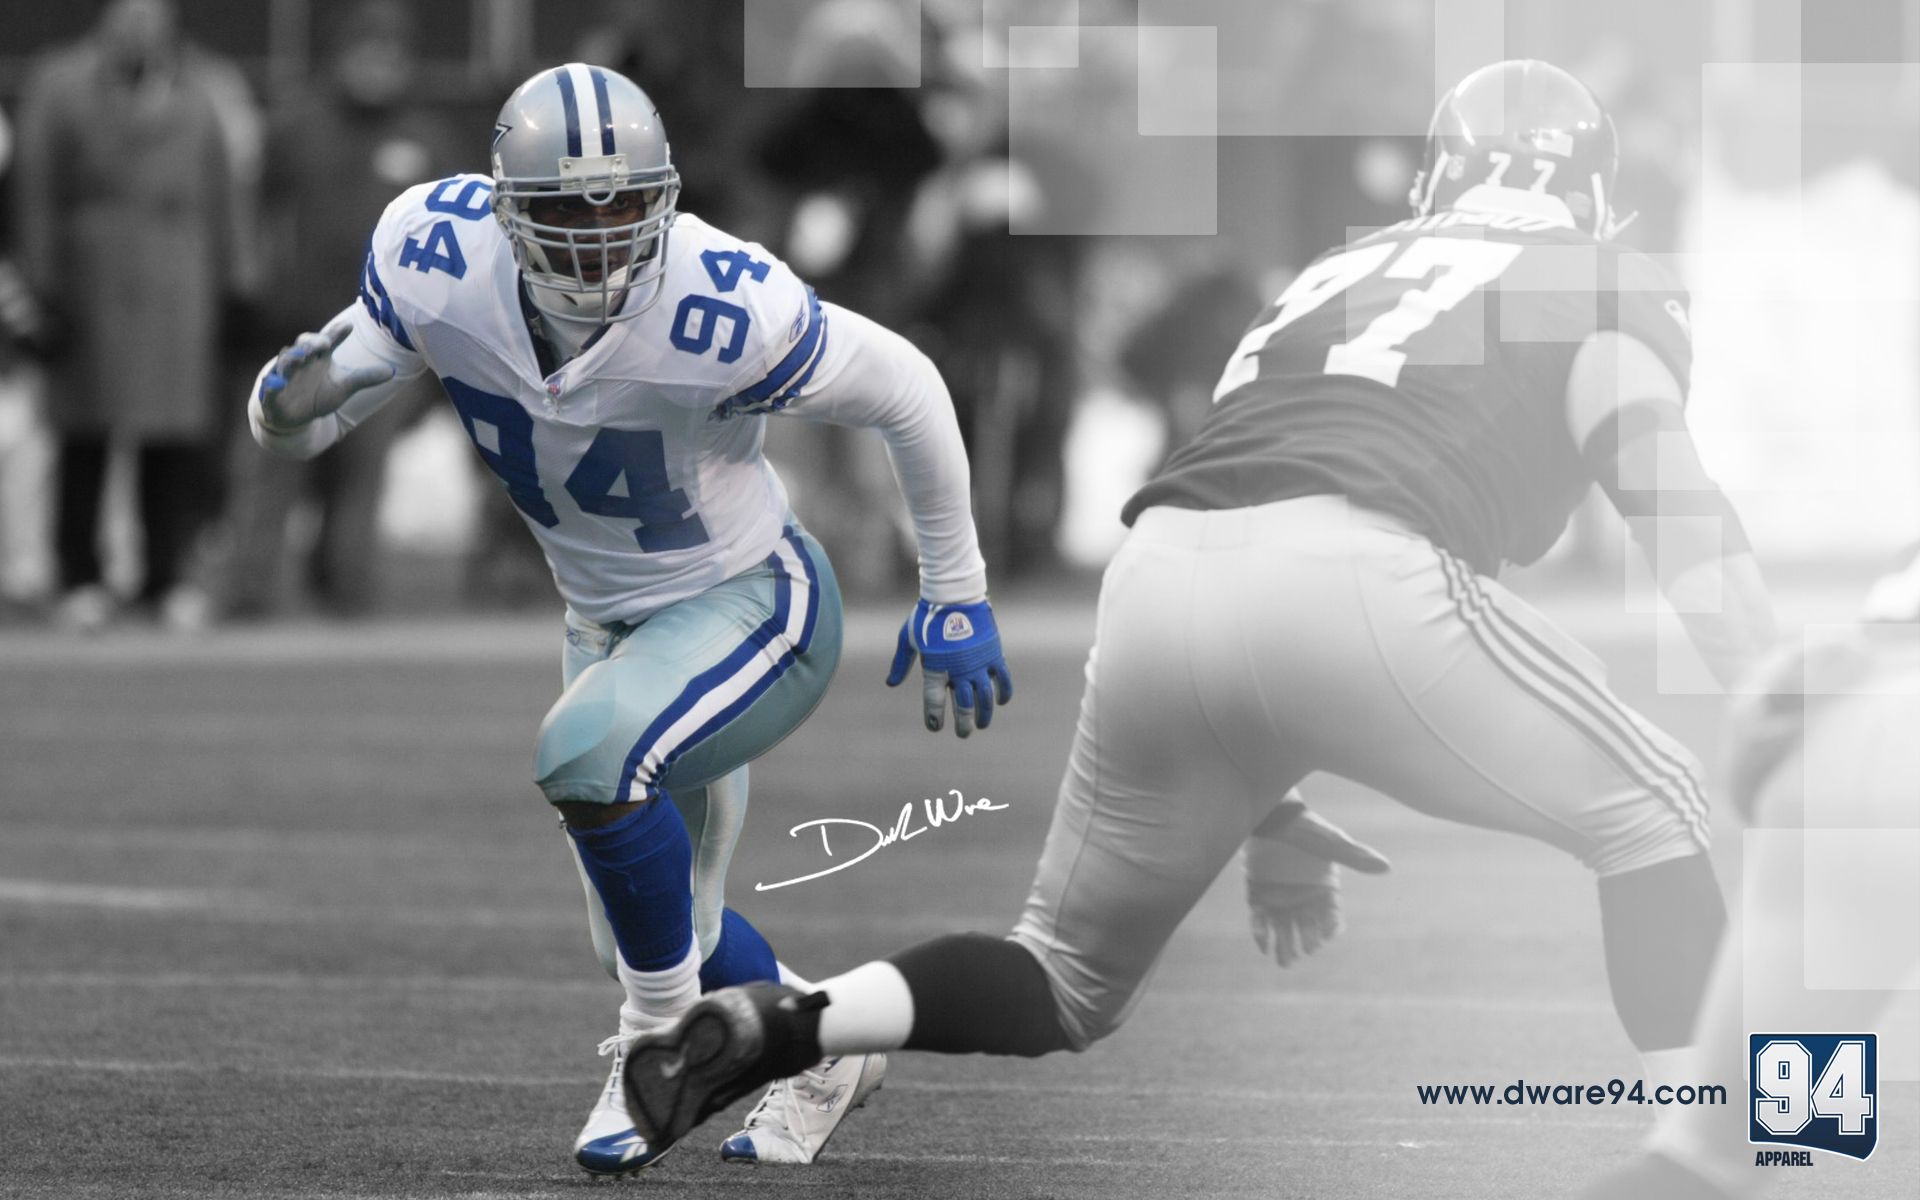 Demarcus Ware Wallpapers High Quality | Download Free